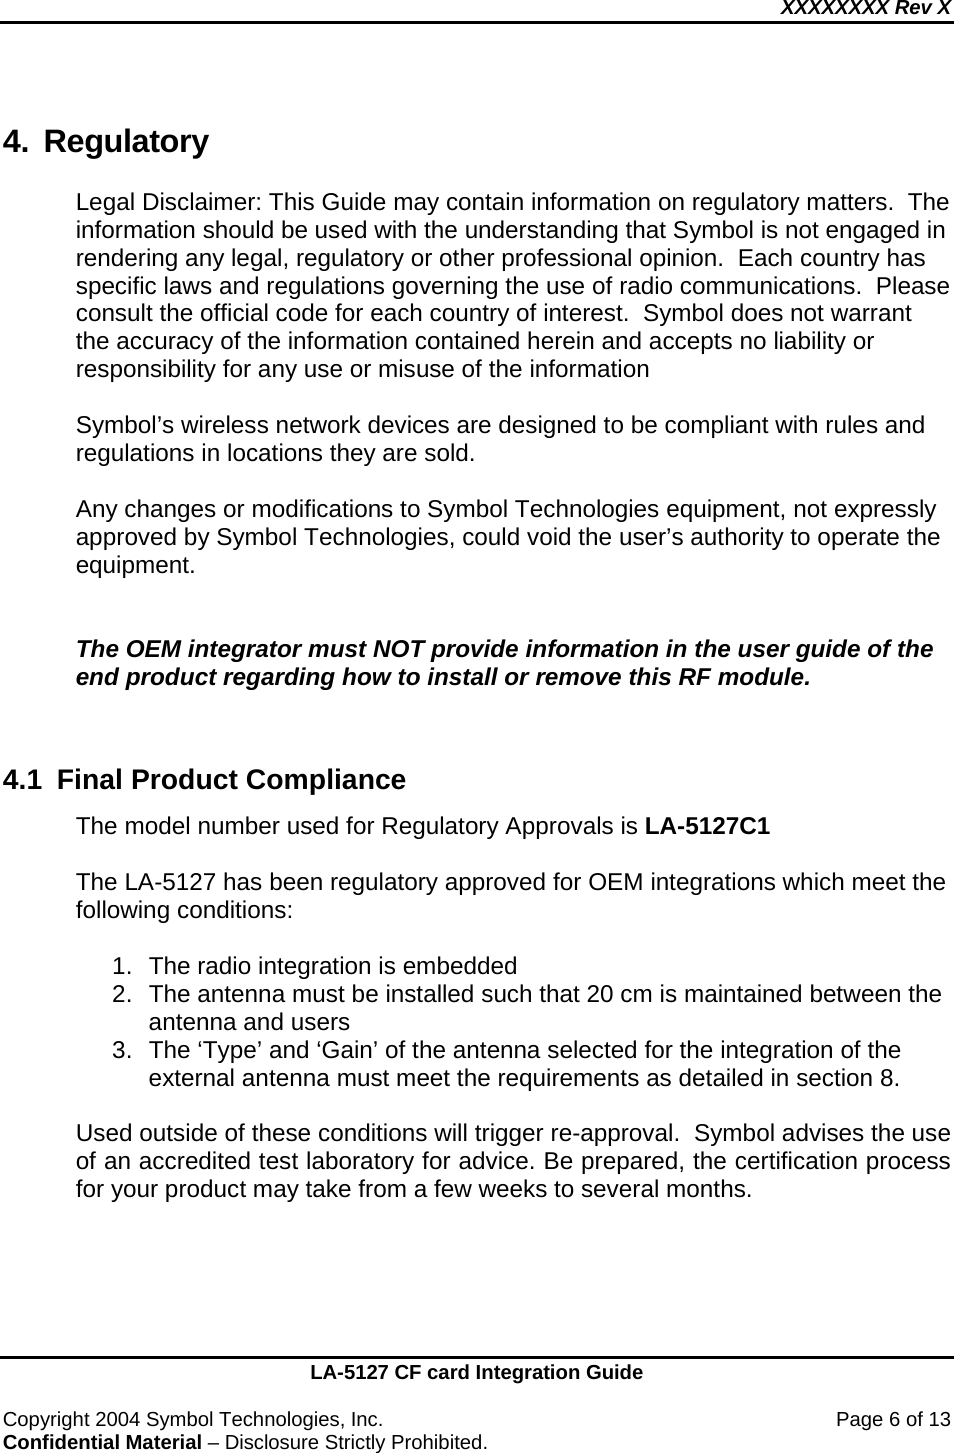 XXXXXXXX Rev X    LA-5127 CF card Integration Guide  Copyright 2004 Symbol Technologies, Inc.    Page 6 of 13 Confidential Material – Disclosure Strictly Prohibited. 4. Regulatory Legal Disclaimer: This Guide may contain information on regulatory matters.  The information should be used with the understanding that Symbol is not engaged in rendering any legal, regulatory or other professional opinion.  Each country has specific laws and regulations governing the use of radio communications.  Please consult the official code for each country of interest.  Symbol does not warrant the accuracy of the information contained herein and accepts no liability or responsibility for any use or misuse of the information  Symbol’s wireless network devices are designed to be compliant with rules and regulations in locations they are sold.   Any changes or modifications to Symbol Technologies equipment, not expressly approved by Symbol Technologies, could void the user’s authority to operate the equipment.   The OEM integrator must NOT provide information in the user guide of the end product regarding how to install or remove this RF module.   4.1  Final Product Compliance The model number used for Regulatory Approvals is LA-5127C1  The LA-5127 has been regulatory approved for OEM integrations which meet the following conditions:  1.  The radio integration is embedded 2.  The antenna must be installed such that 20 cm is maintained between the antenna and users 3.  The ‘Type’ and ‘Gain’ of the antenna selected for the integration of the external antenna must meet the requirements as detailed in section 8.  Used outside of these conditions will trigger re-approval.  Symbol advises the use of an accredited test laboratory for advice. Be prepared, the certification process for your product may take from a few weeks to several months.   